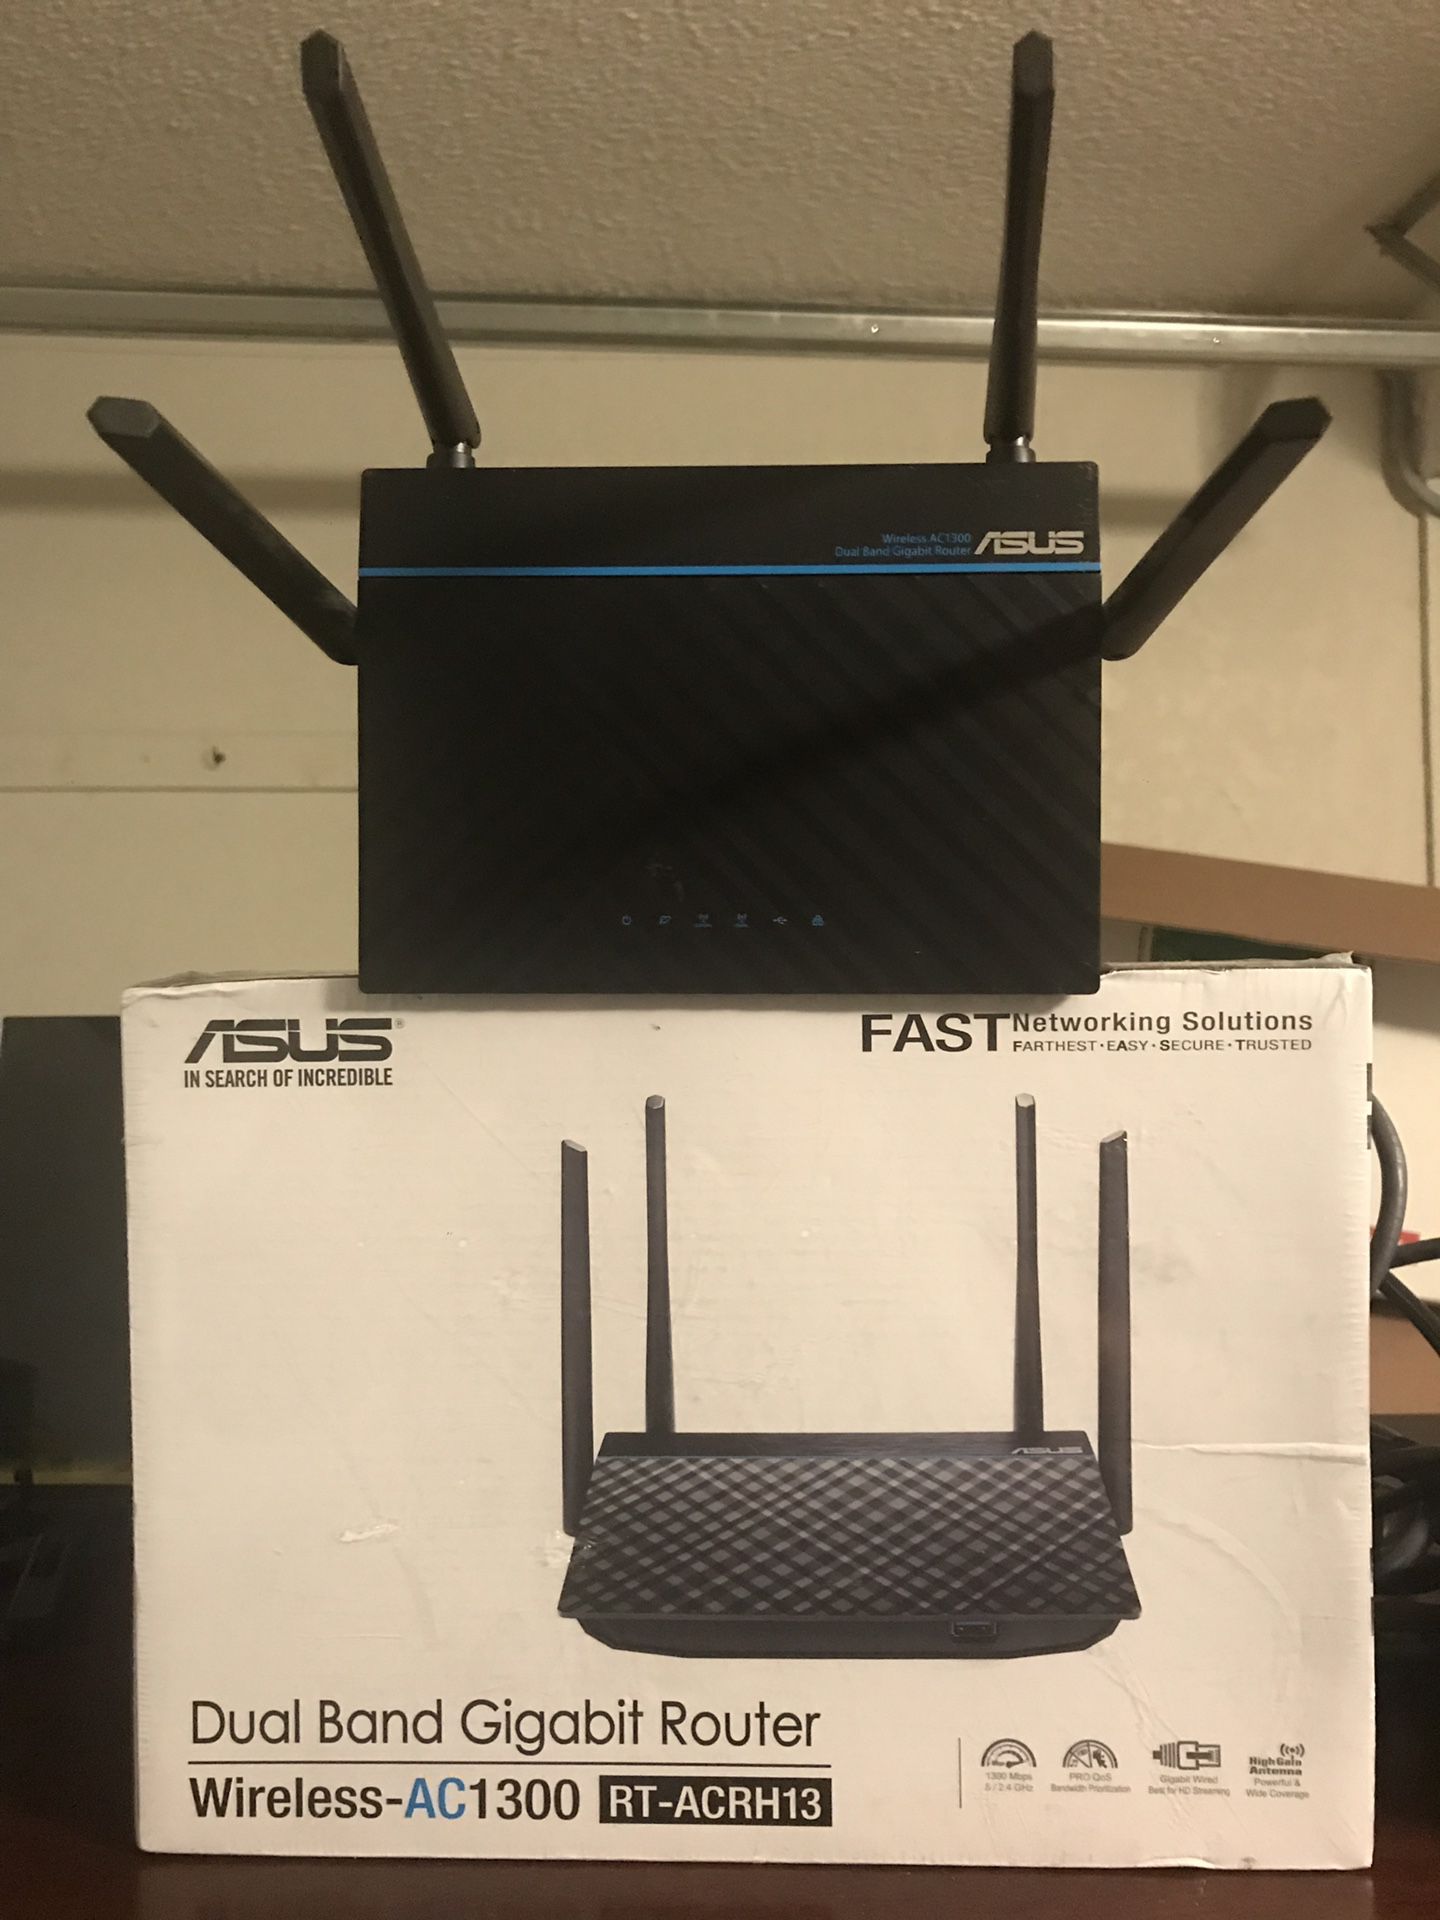 I HAVE A GIGABIT ROUTER ASUS AC1300 RT-ACRH13